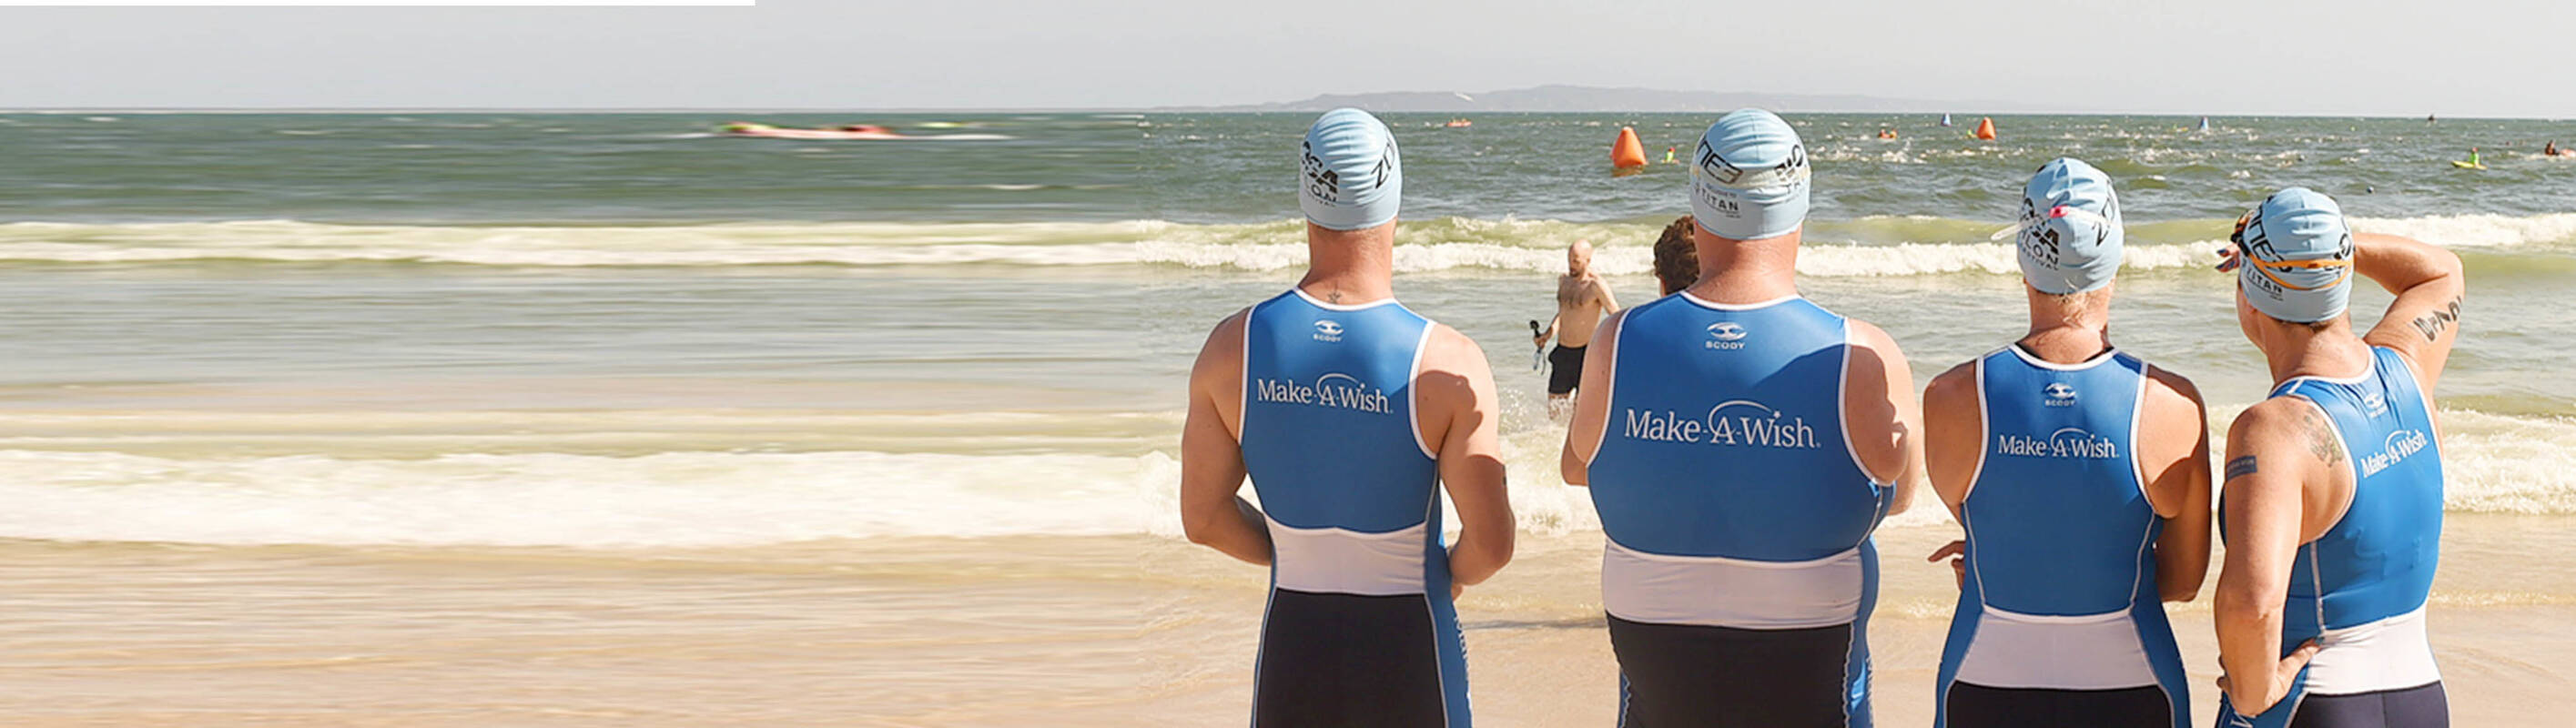 Make A Wish Australia, Children's Charity - Team Wish at the Noosa Tri event facing the water